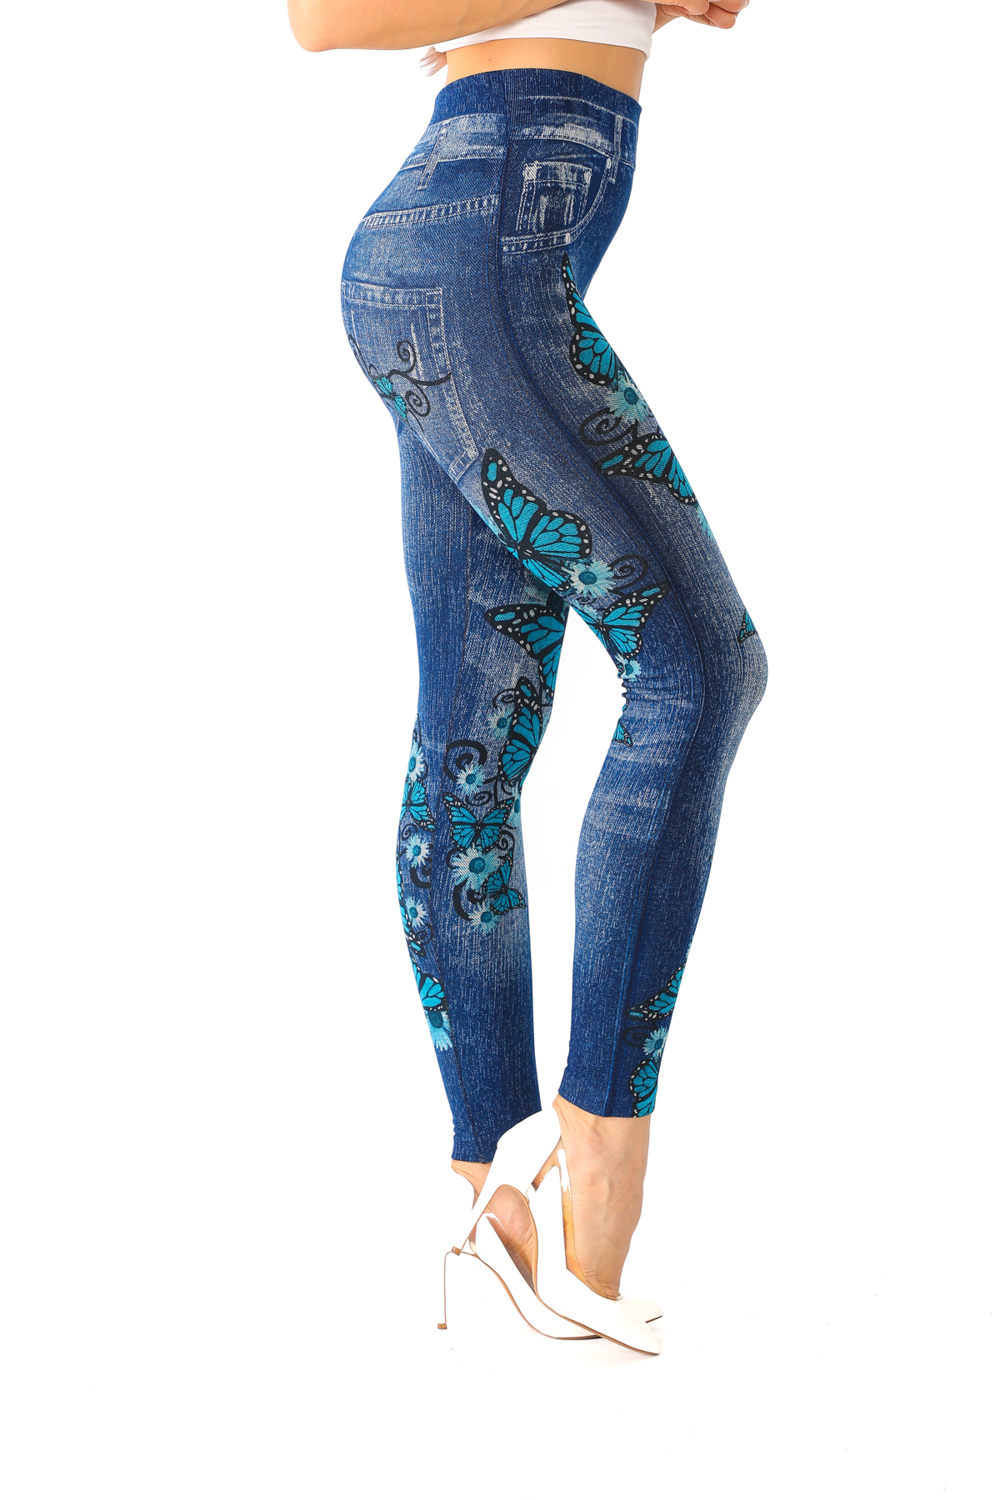 Denim Leggings with Blue Butterfly and Daisy Pattern